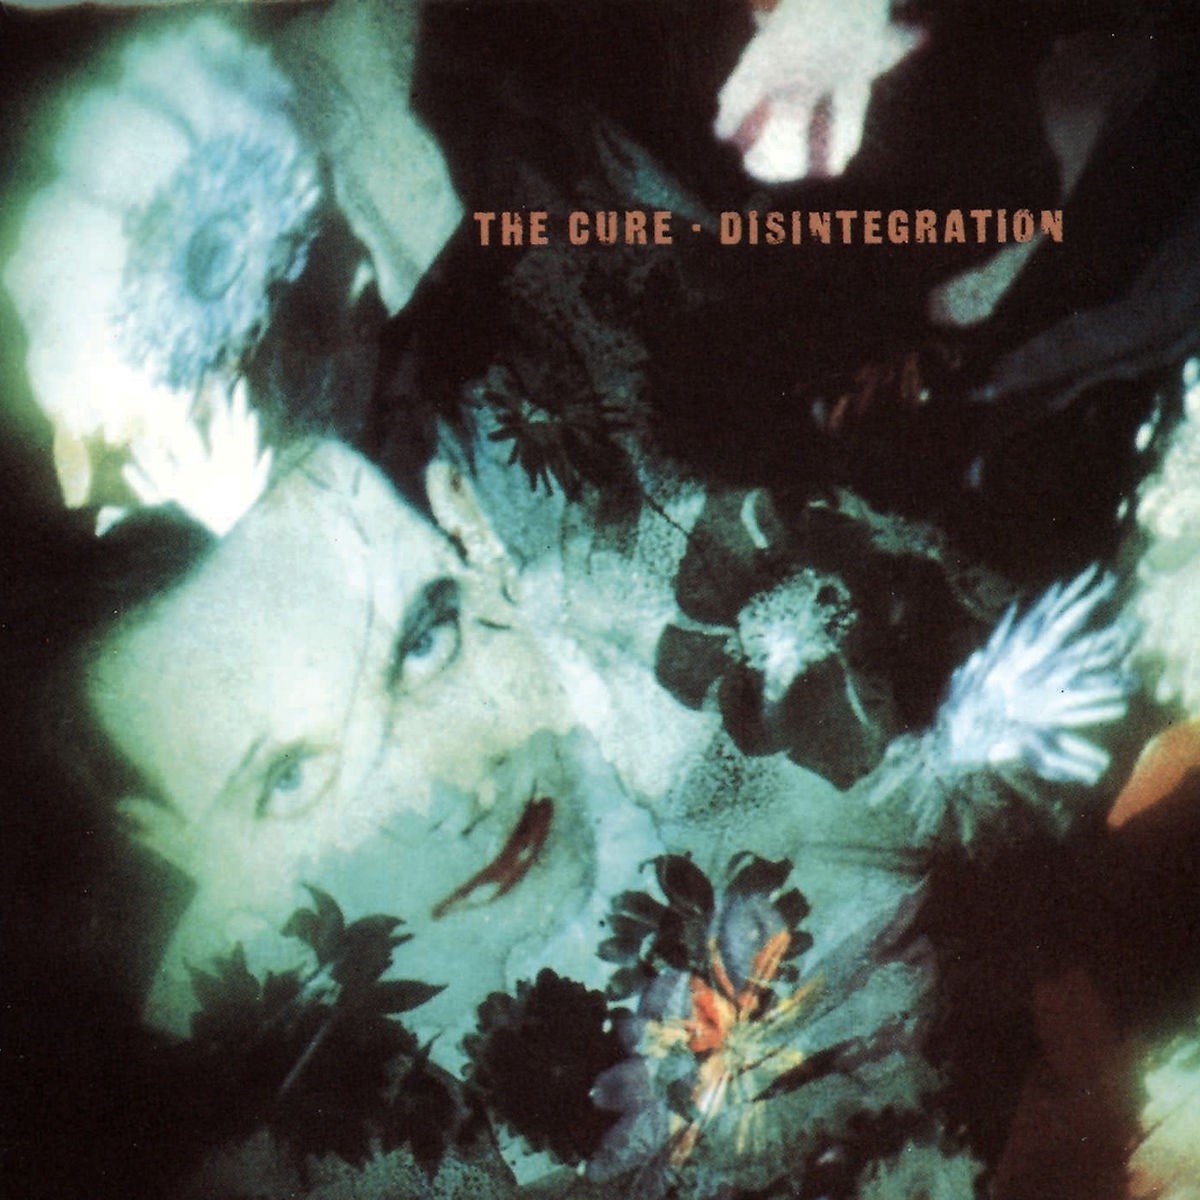 The Cure - Disintegration (3 CD) - The Cure